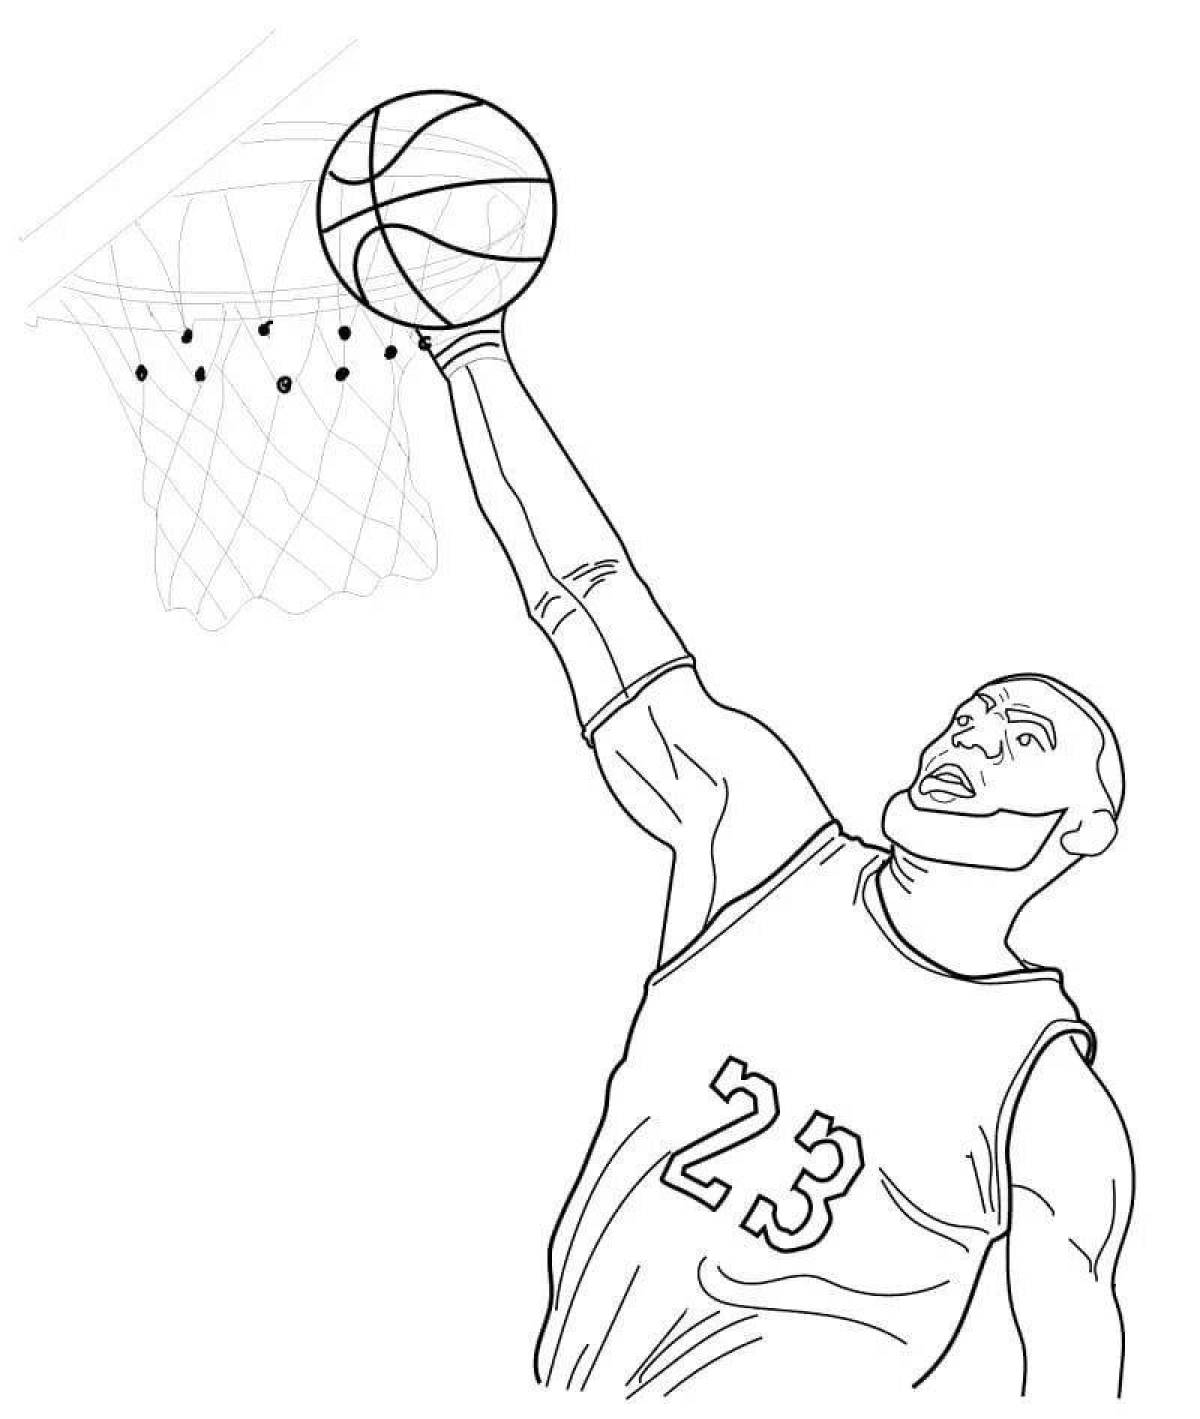 Lebron james reference coloring